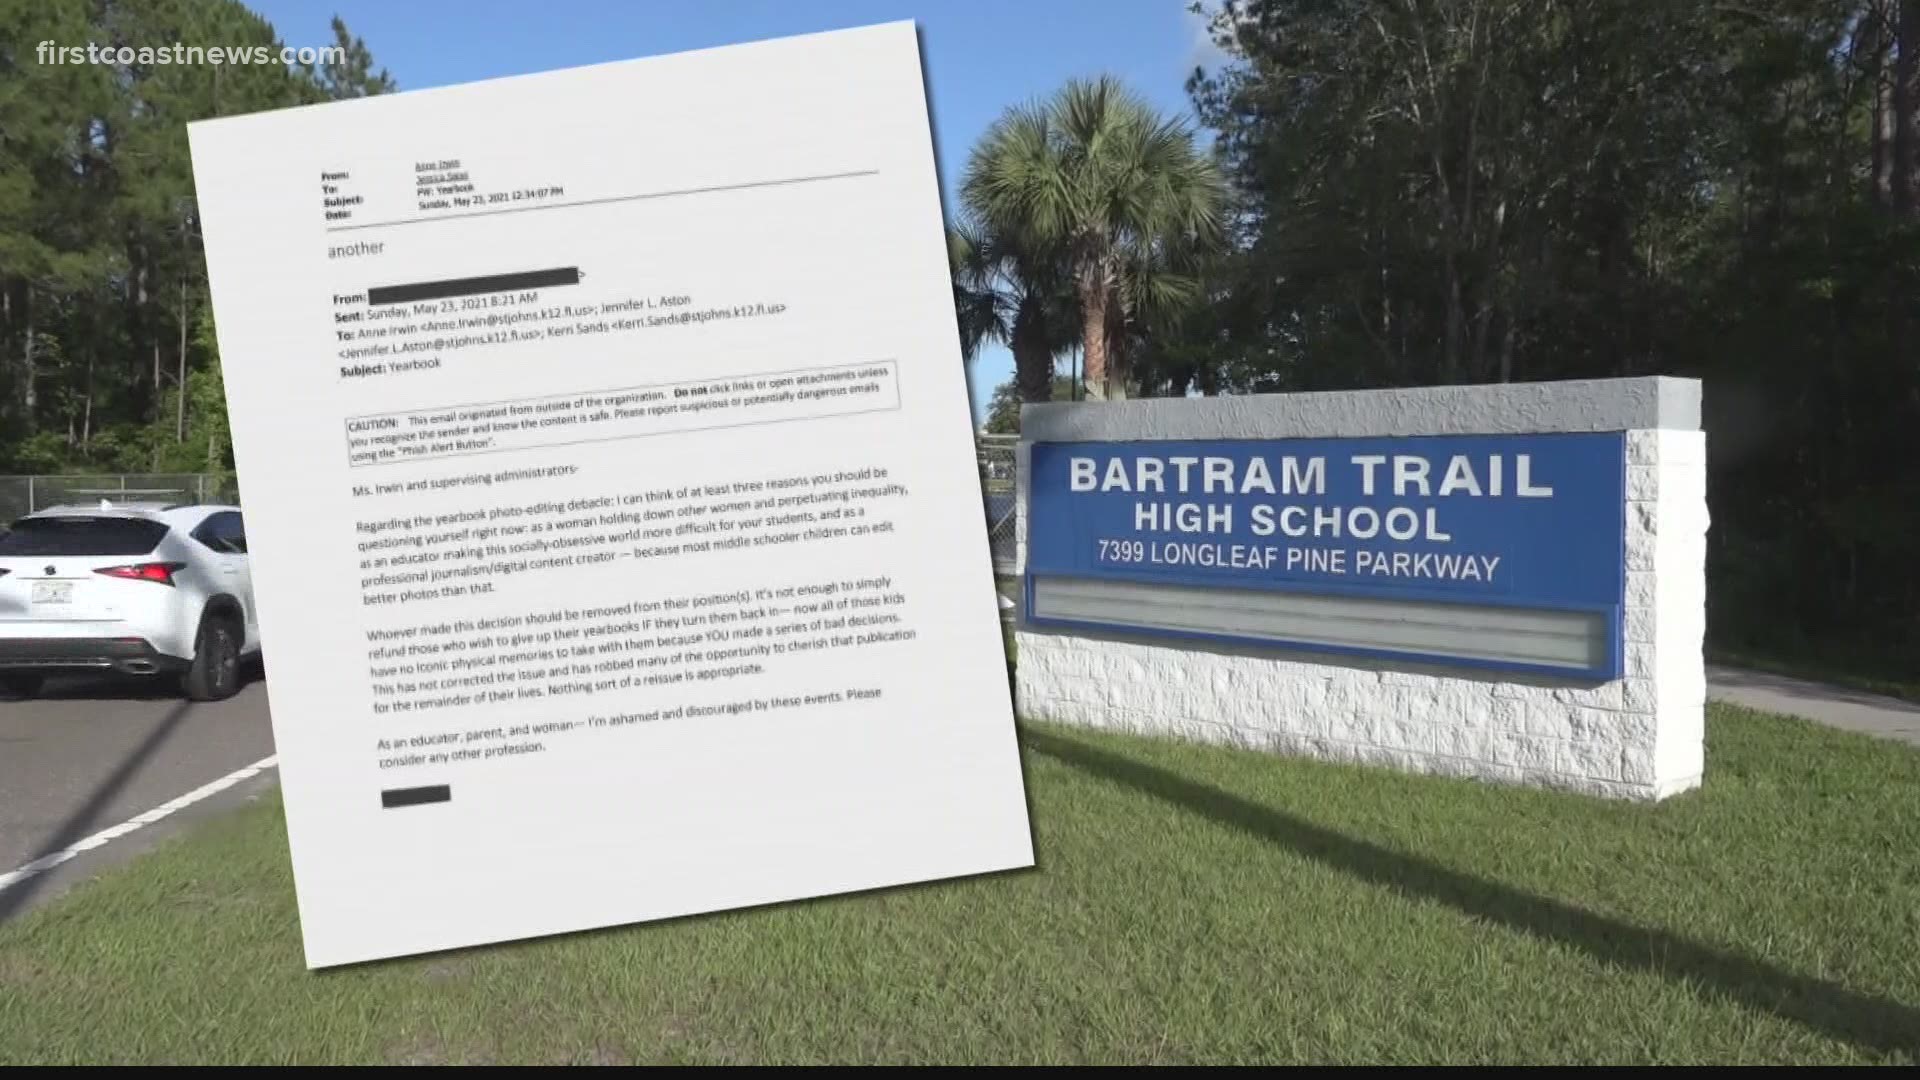 First Coast News is digging deeper into the yearbook controversy combing through more than 167 emails obtained in a public records request.